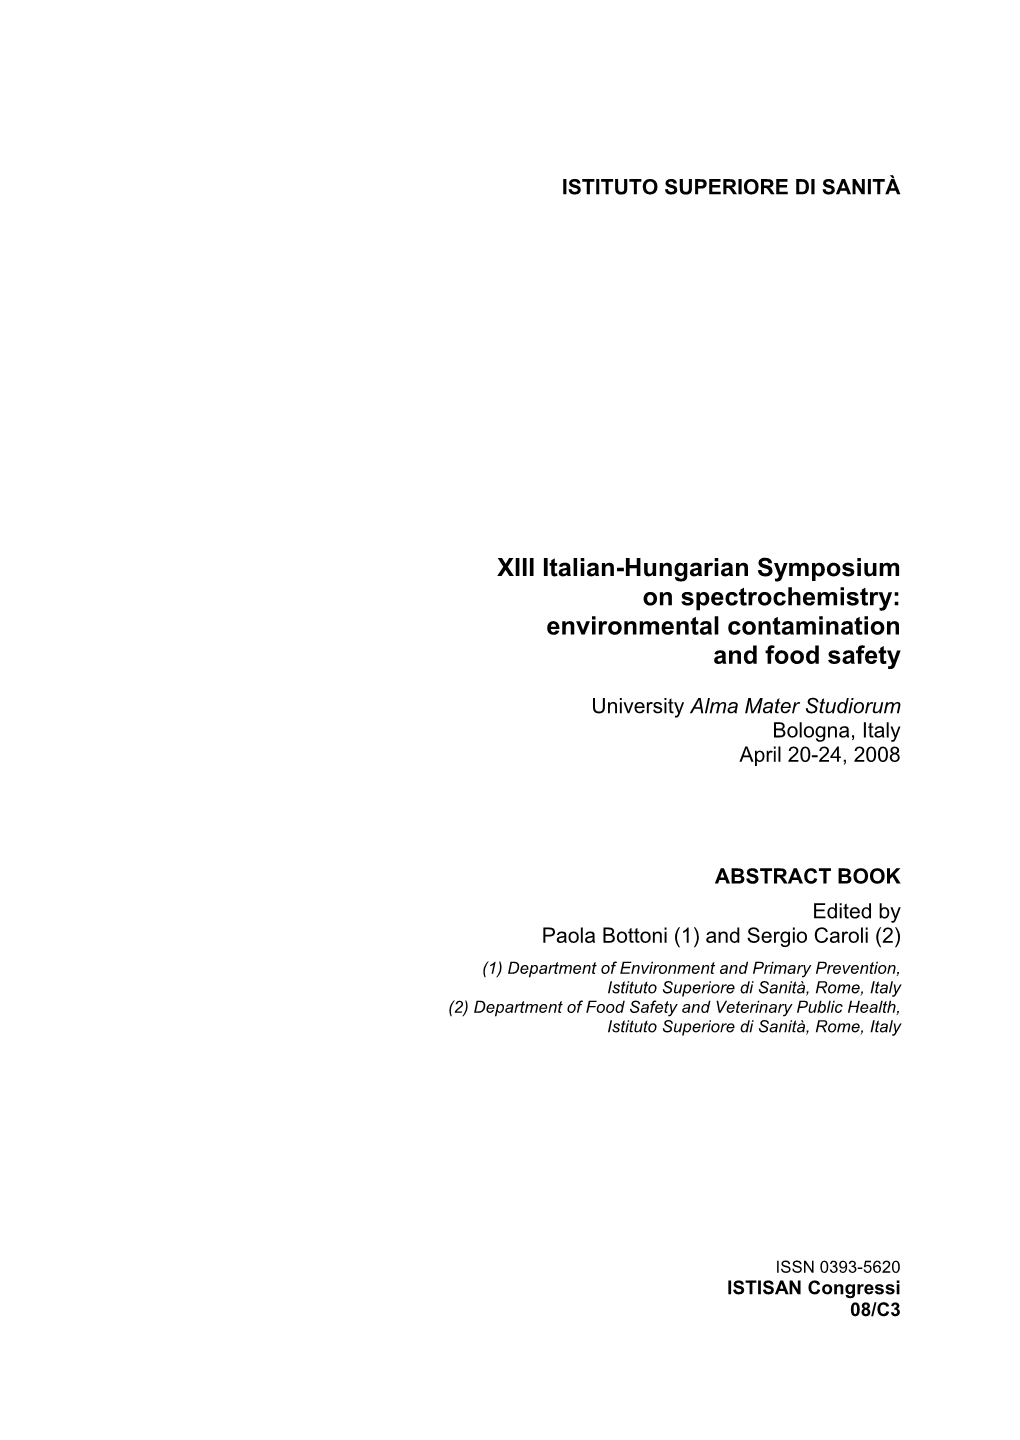 XIII Italian-Hungarian Symposium on Spectrochemistry: Environmental Contamination and Food Safety